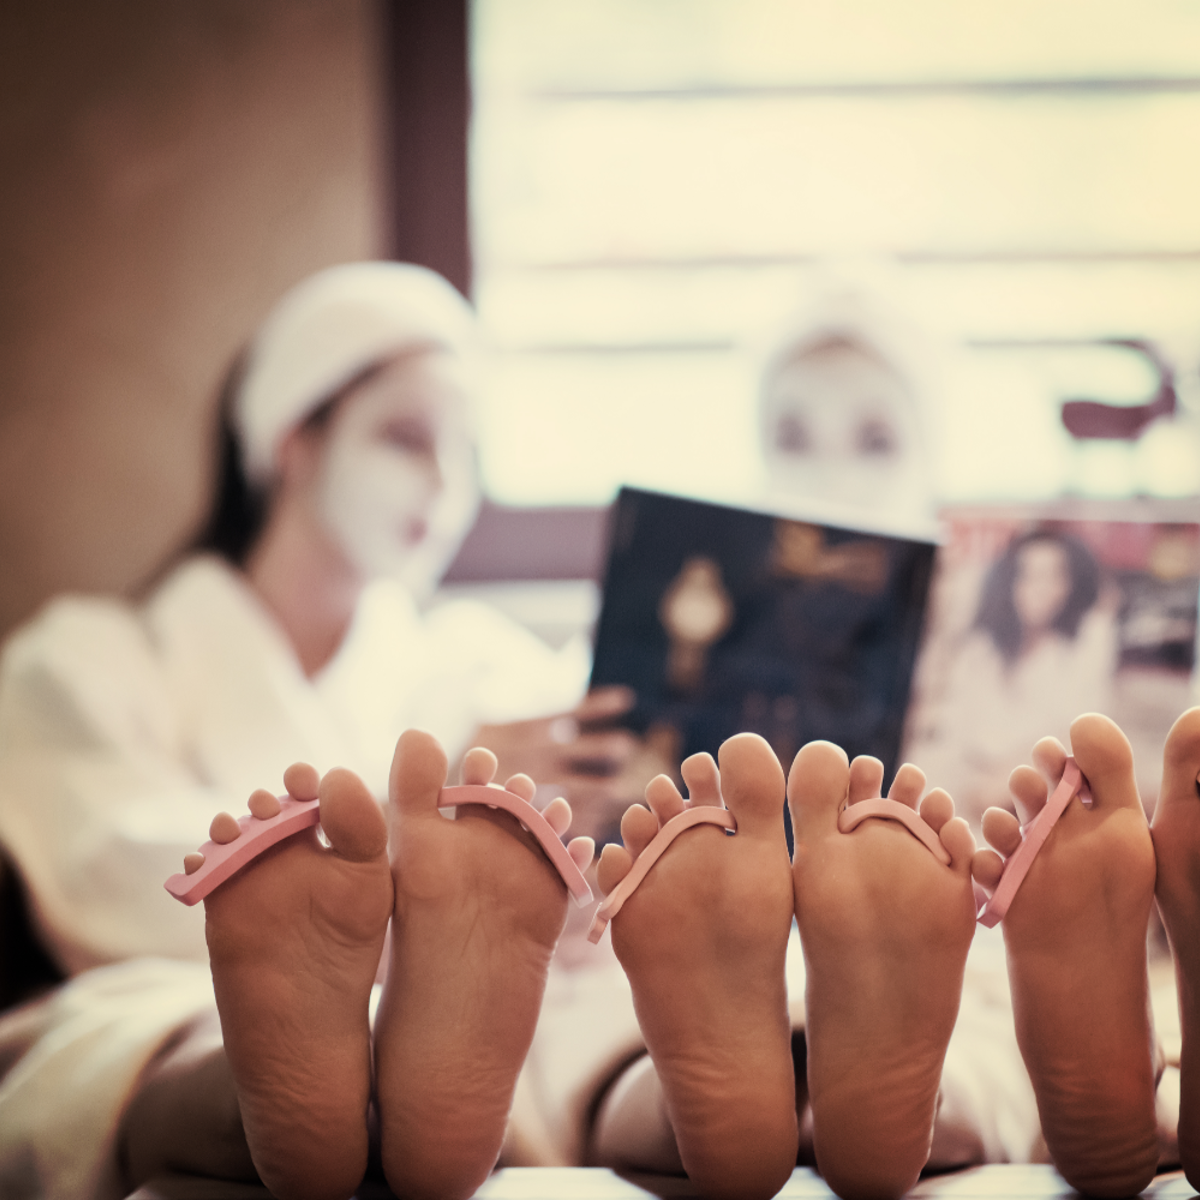 Three women relaxing on a bed in spa robes with their feet elevated.